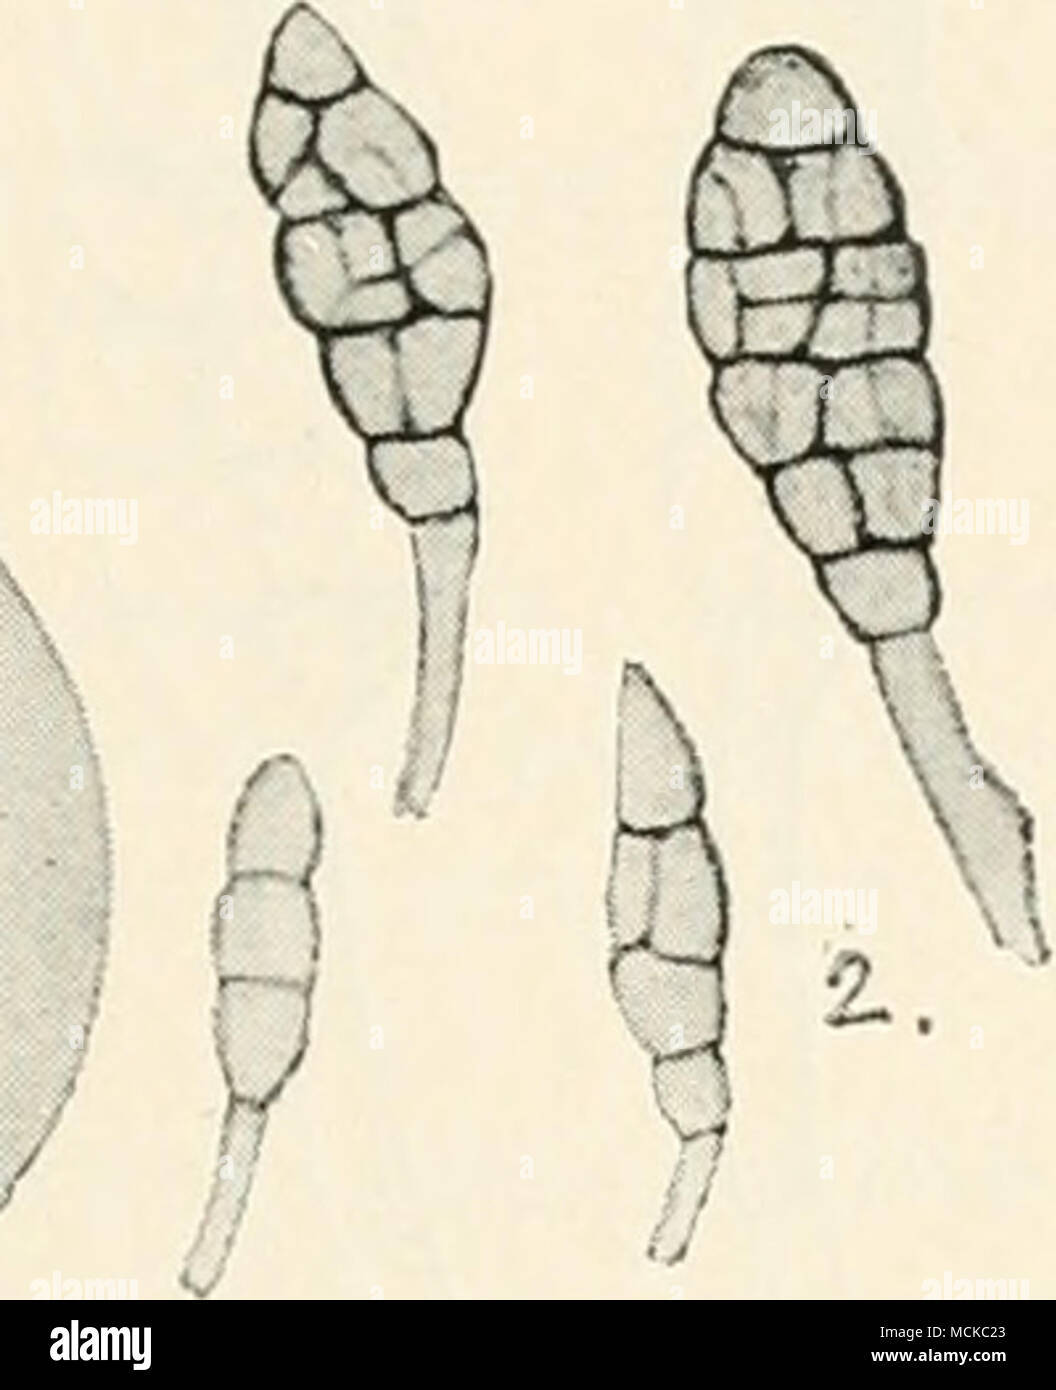 . Fig. 151.—Afdirusporiinn solani. i, tomato diseased ; 2, conidia in various stages of development, highly mag. months old to germinate, other observers have been more successful, and it is quite probable that old diseased stems or fruit lying about would continue to produce conidia the following season. At all events, chlamydospores are present in decaying parts, more especially in tomato fruit, consequently the most important point is to collect and destroy all diseased plants and fruit. Tomatoes should not follow a diseased crop of potatoes, or the reverse. If the disease appears, Bordeaux Stock Photo